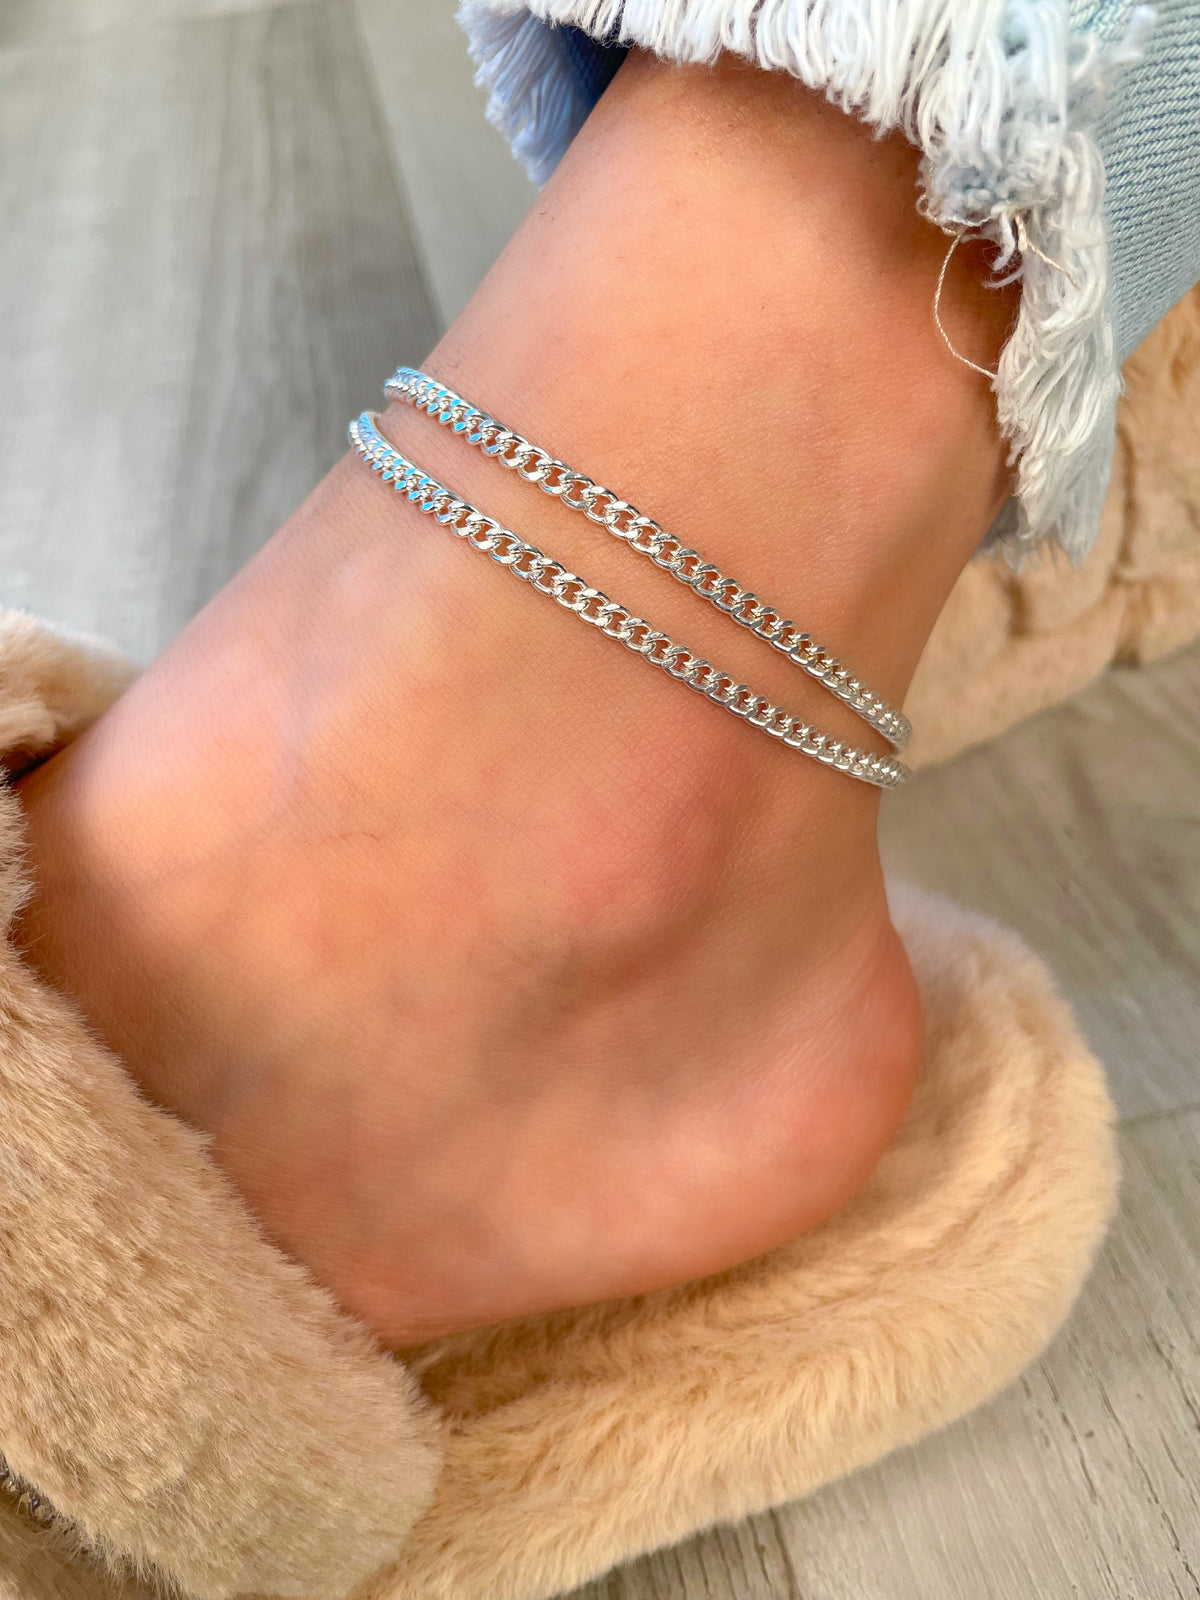 silver / gold tone anklet, chain link, adjustable